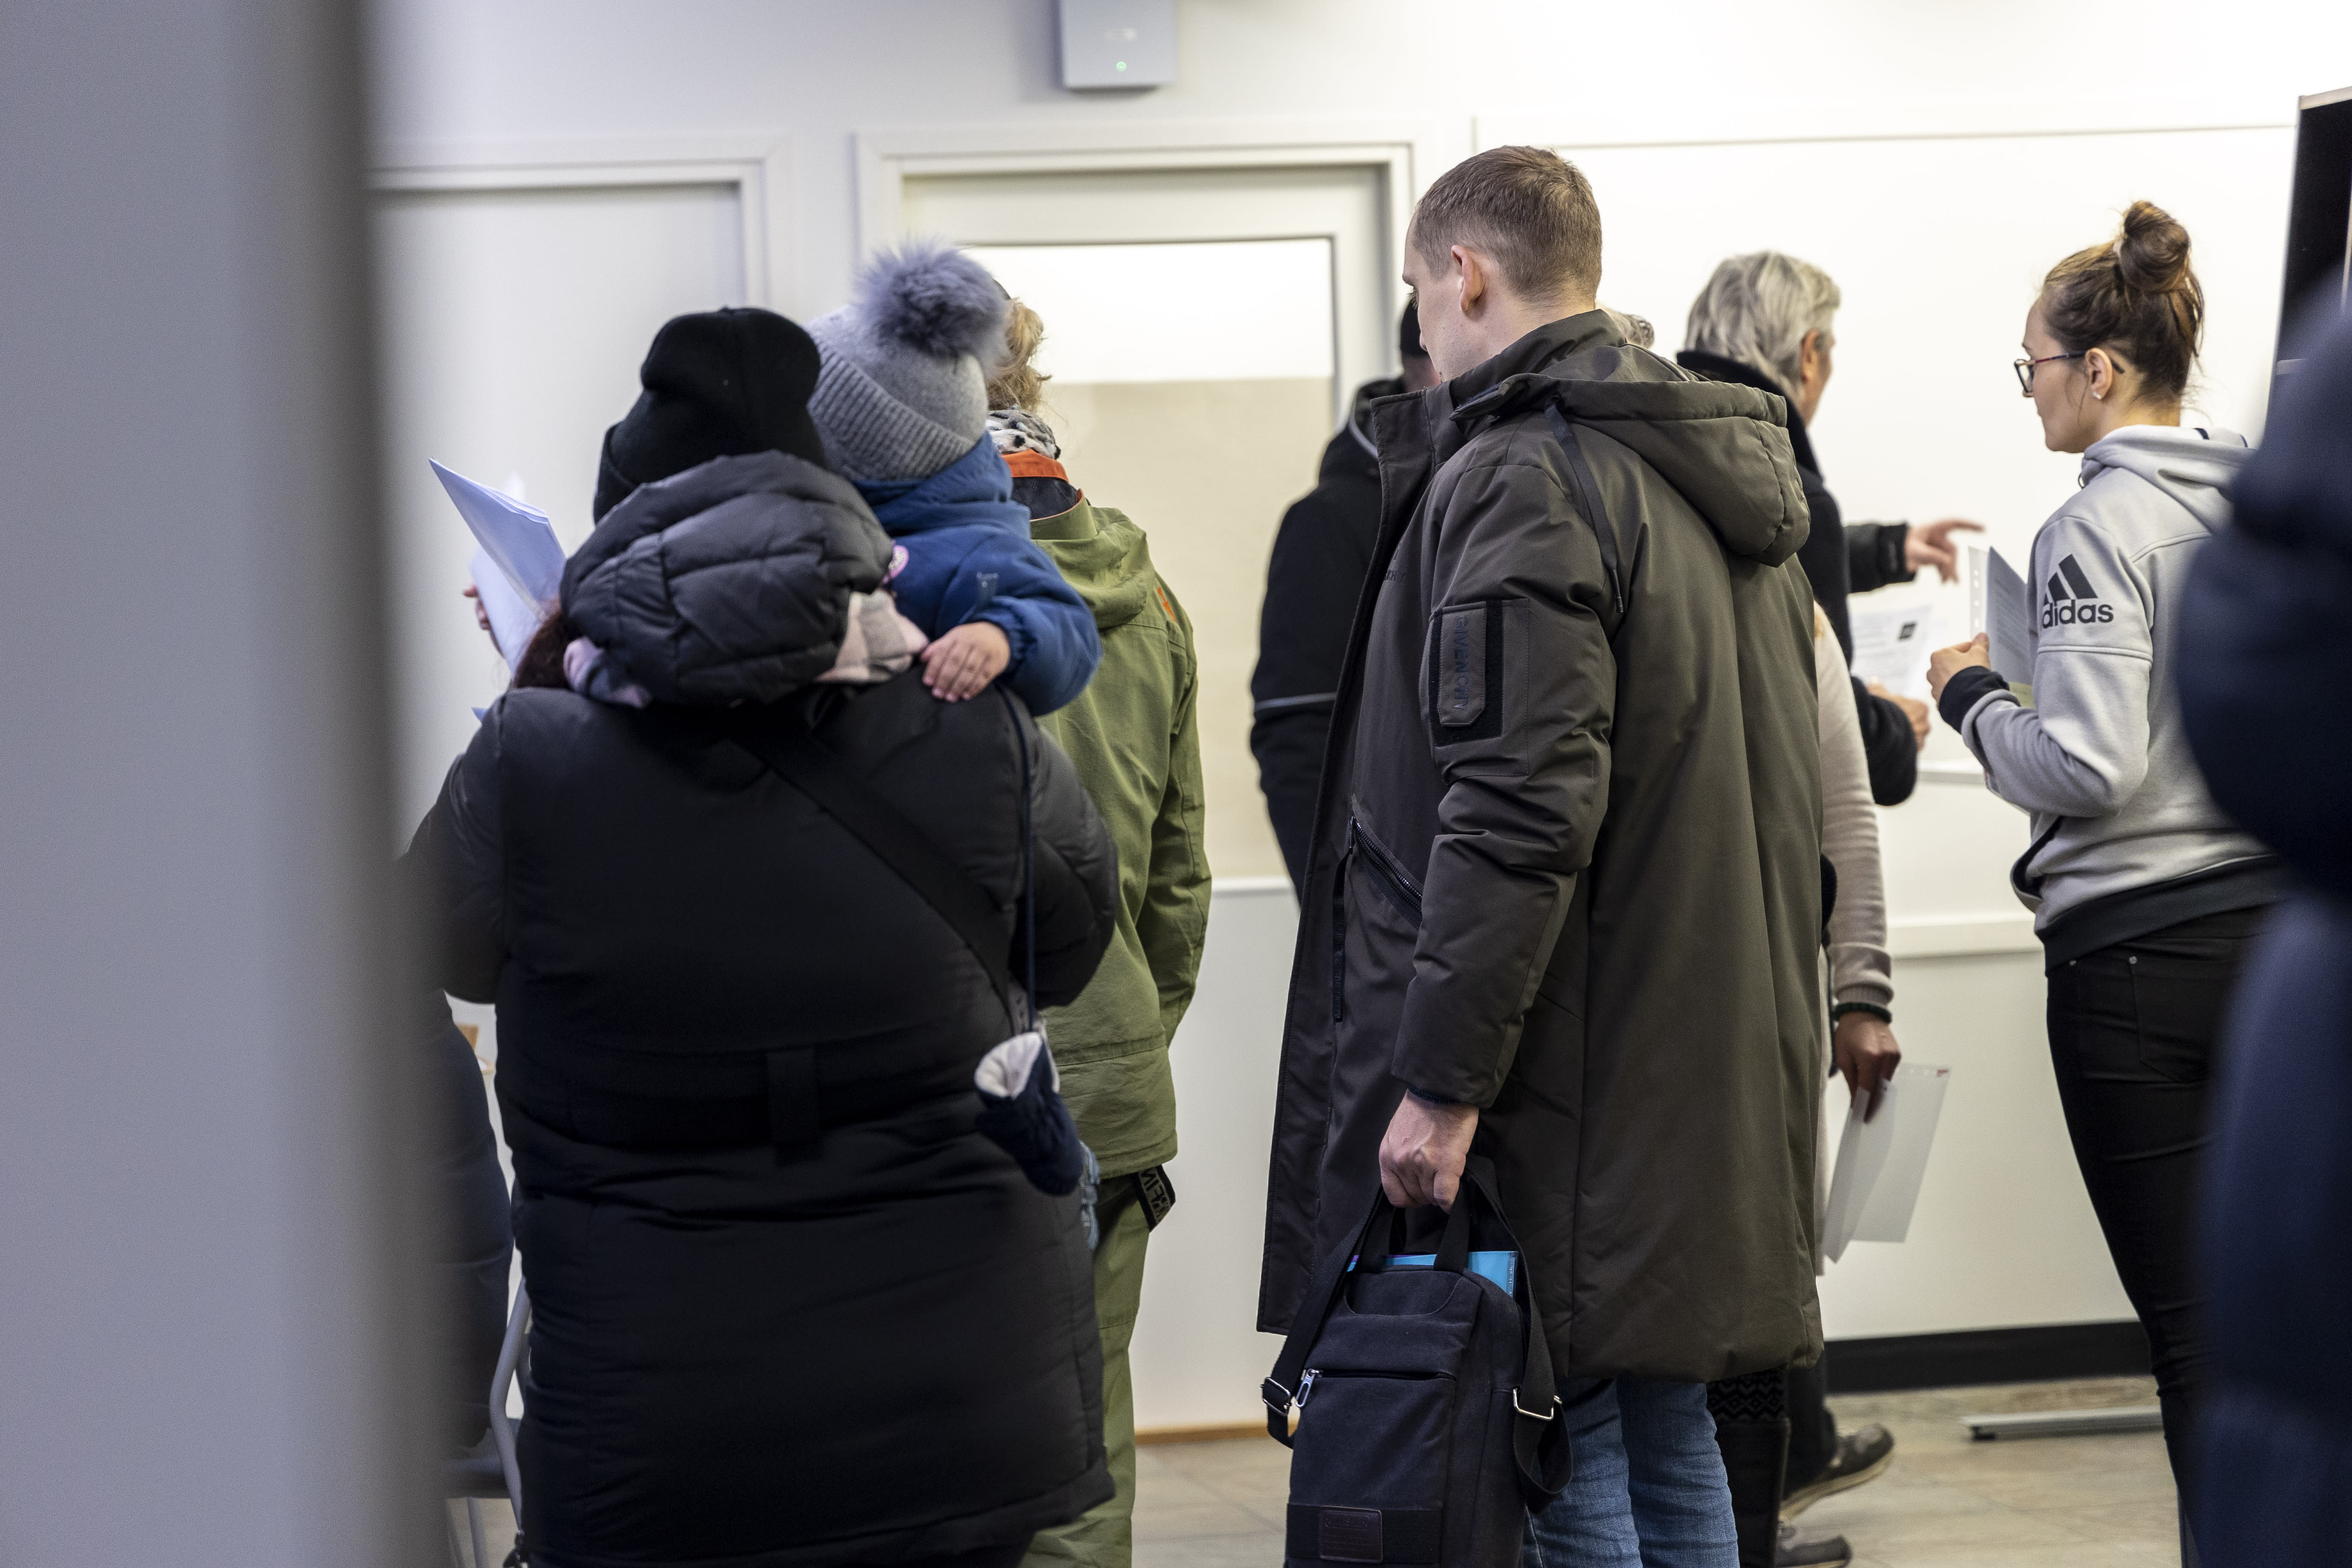 Government negotiators examine the use of food vouchers and cuts in refugee quotas as Finland tries to save money on immigration